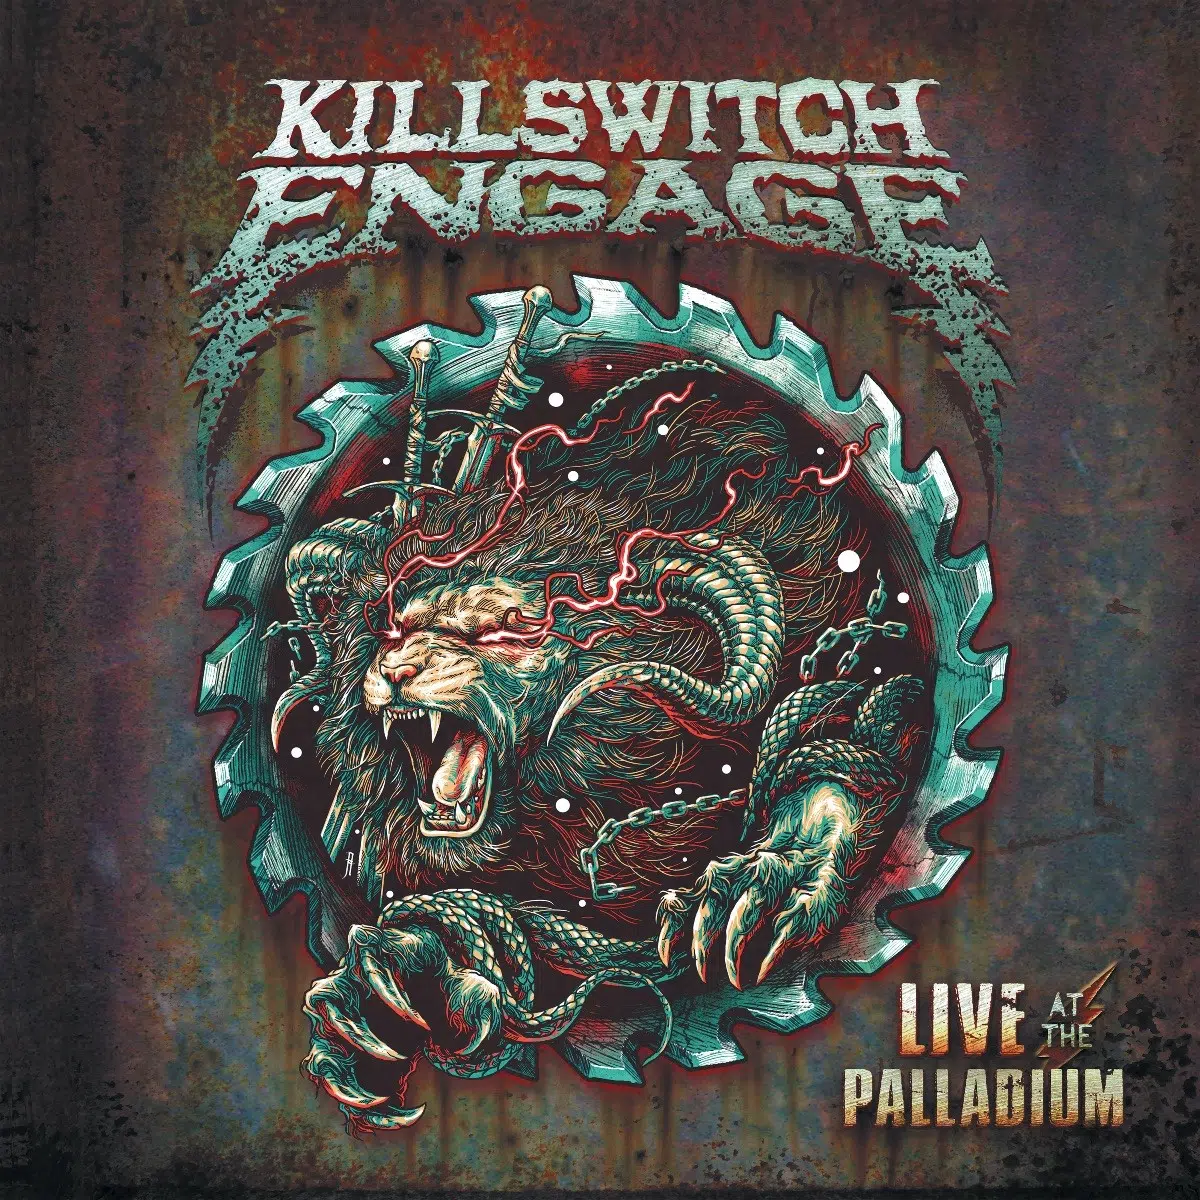 Killswitch Engage set to release Live stuff!